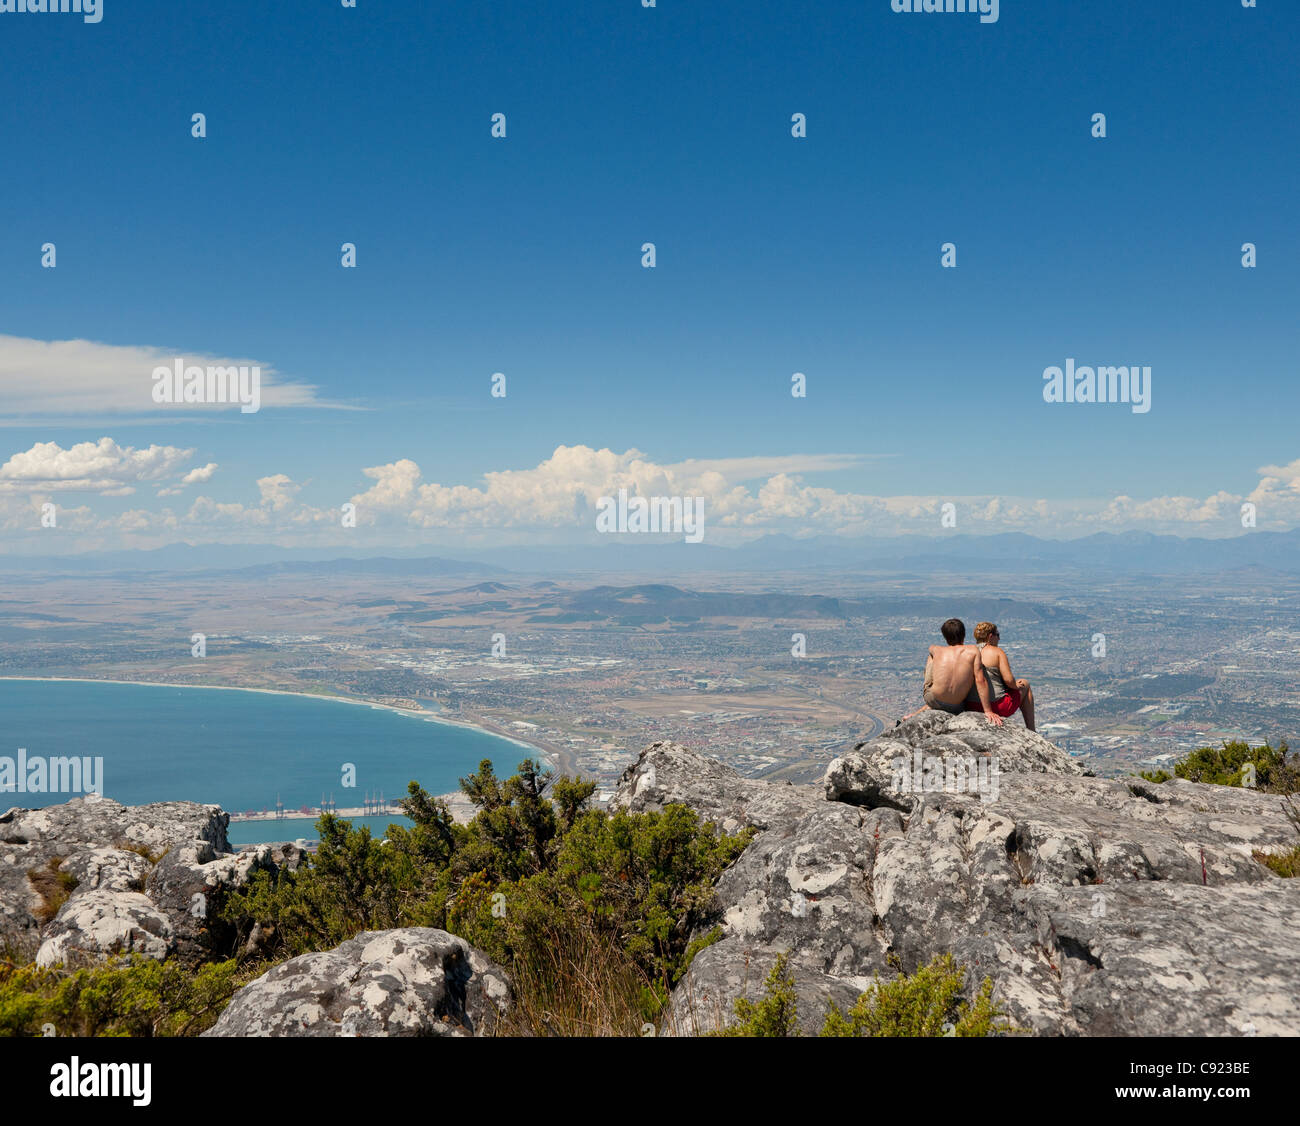 Lookout positions at the top of Table Mountain in Cape Town afford visitors striking views of the city below and across the Stock Photo